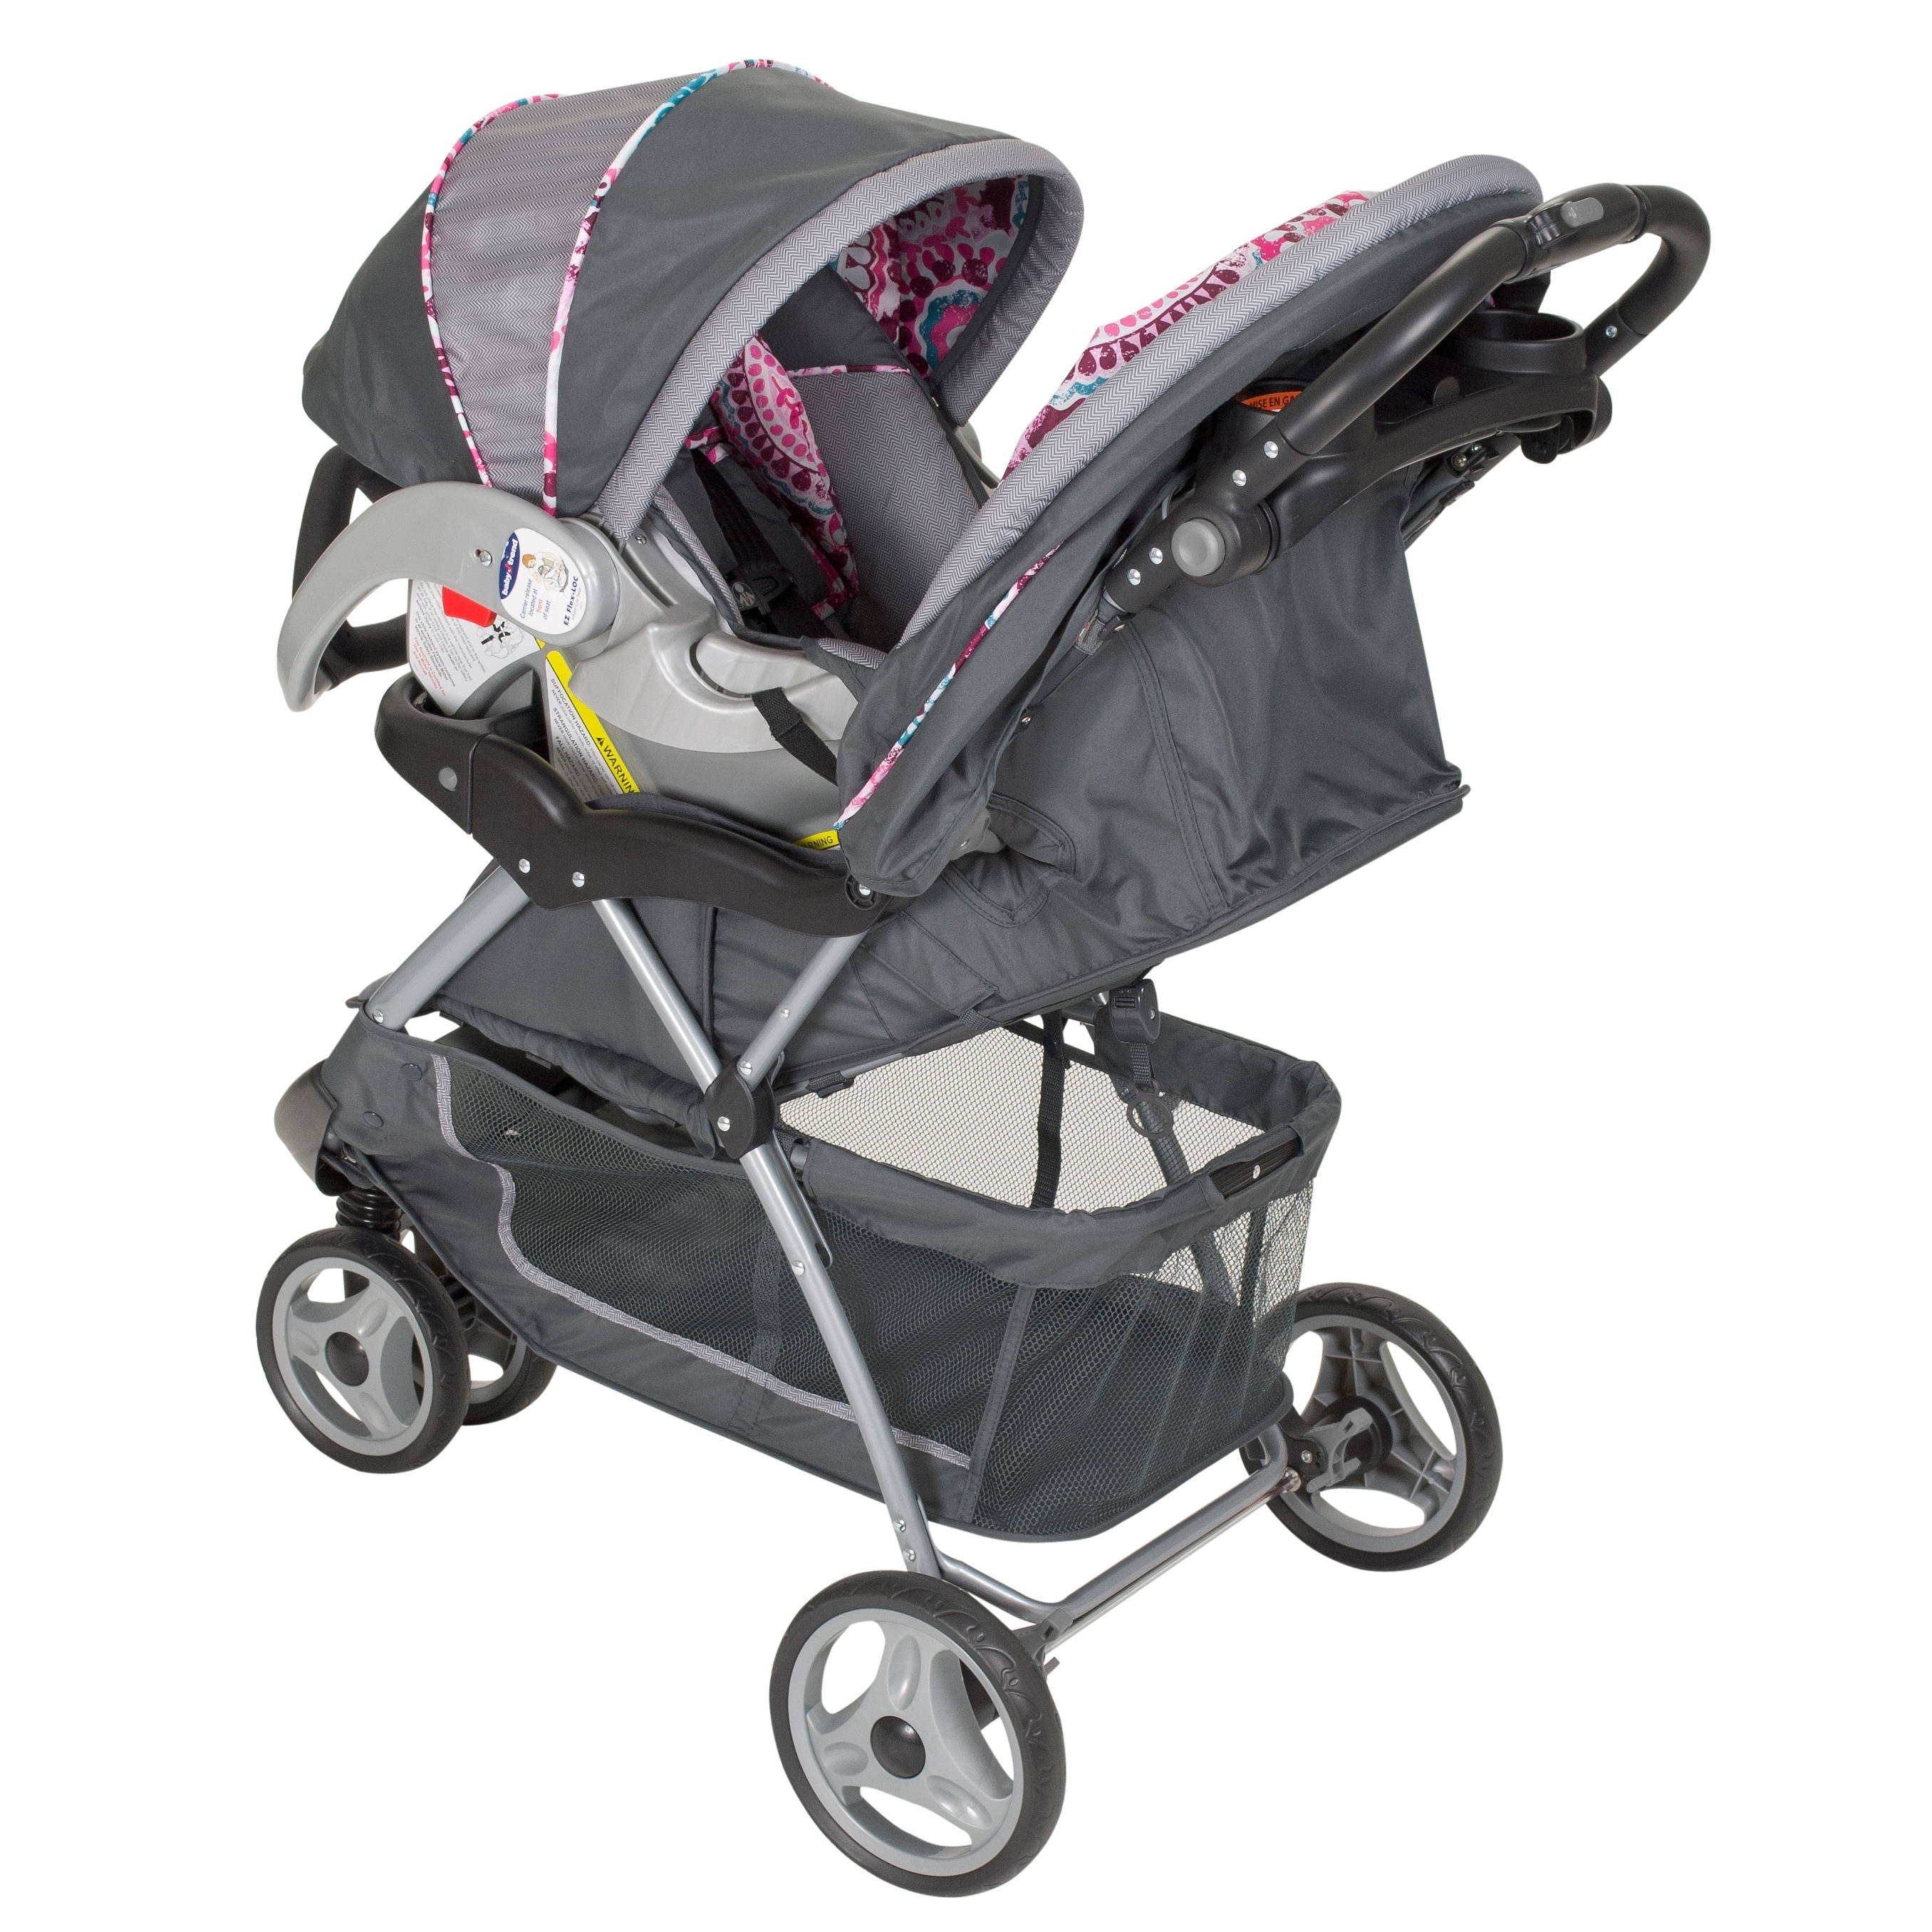 Baby Trend EZ Ride 5 Travel System, Paisley - image 3 of 6